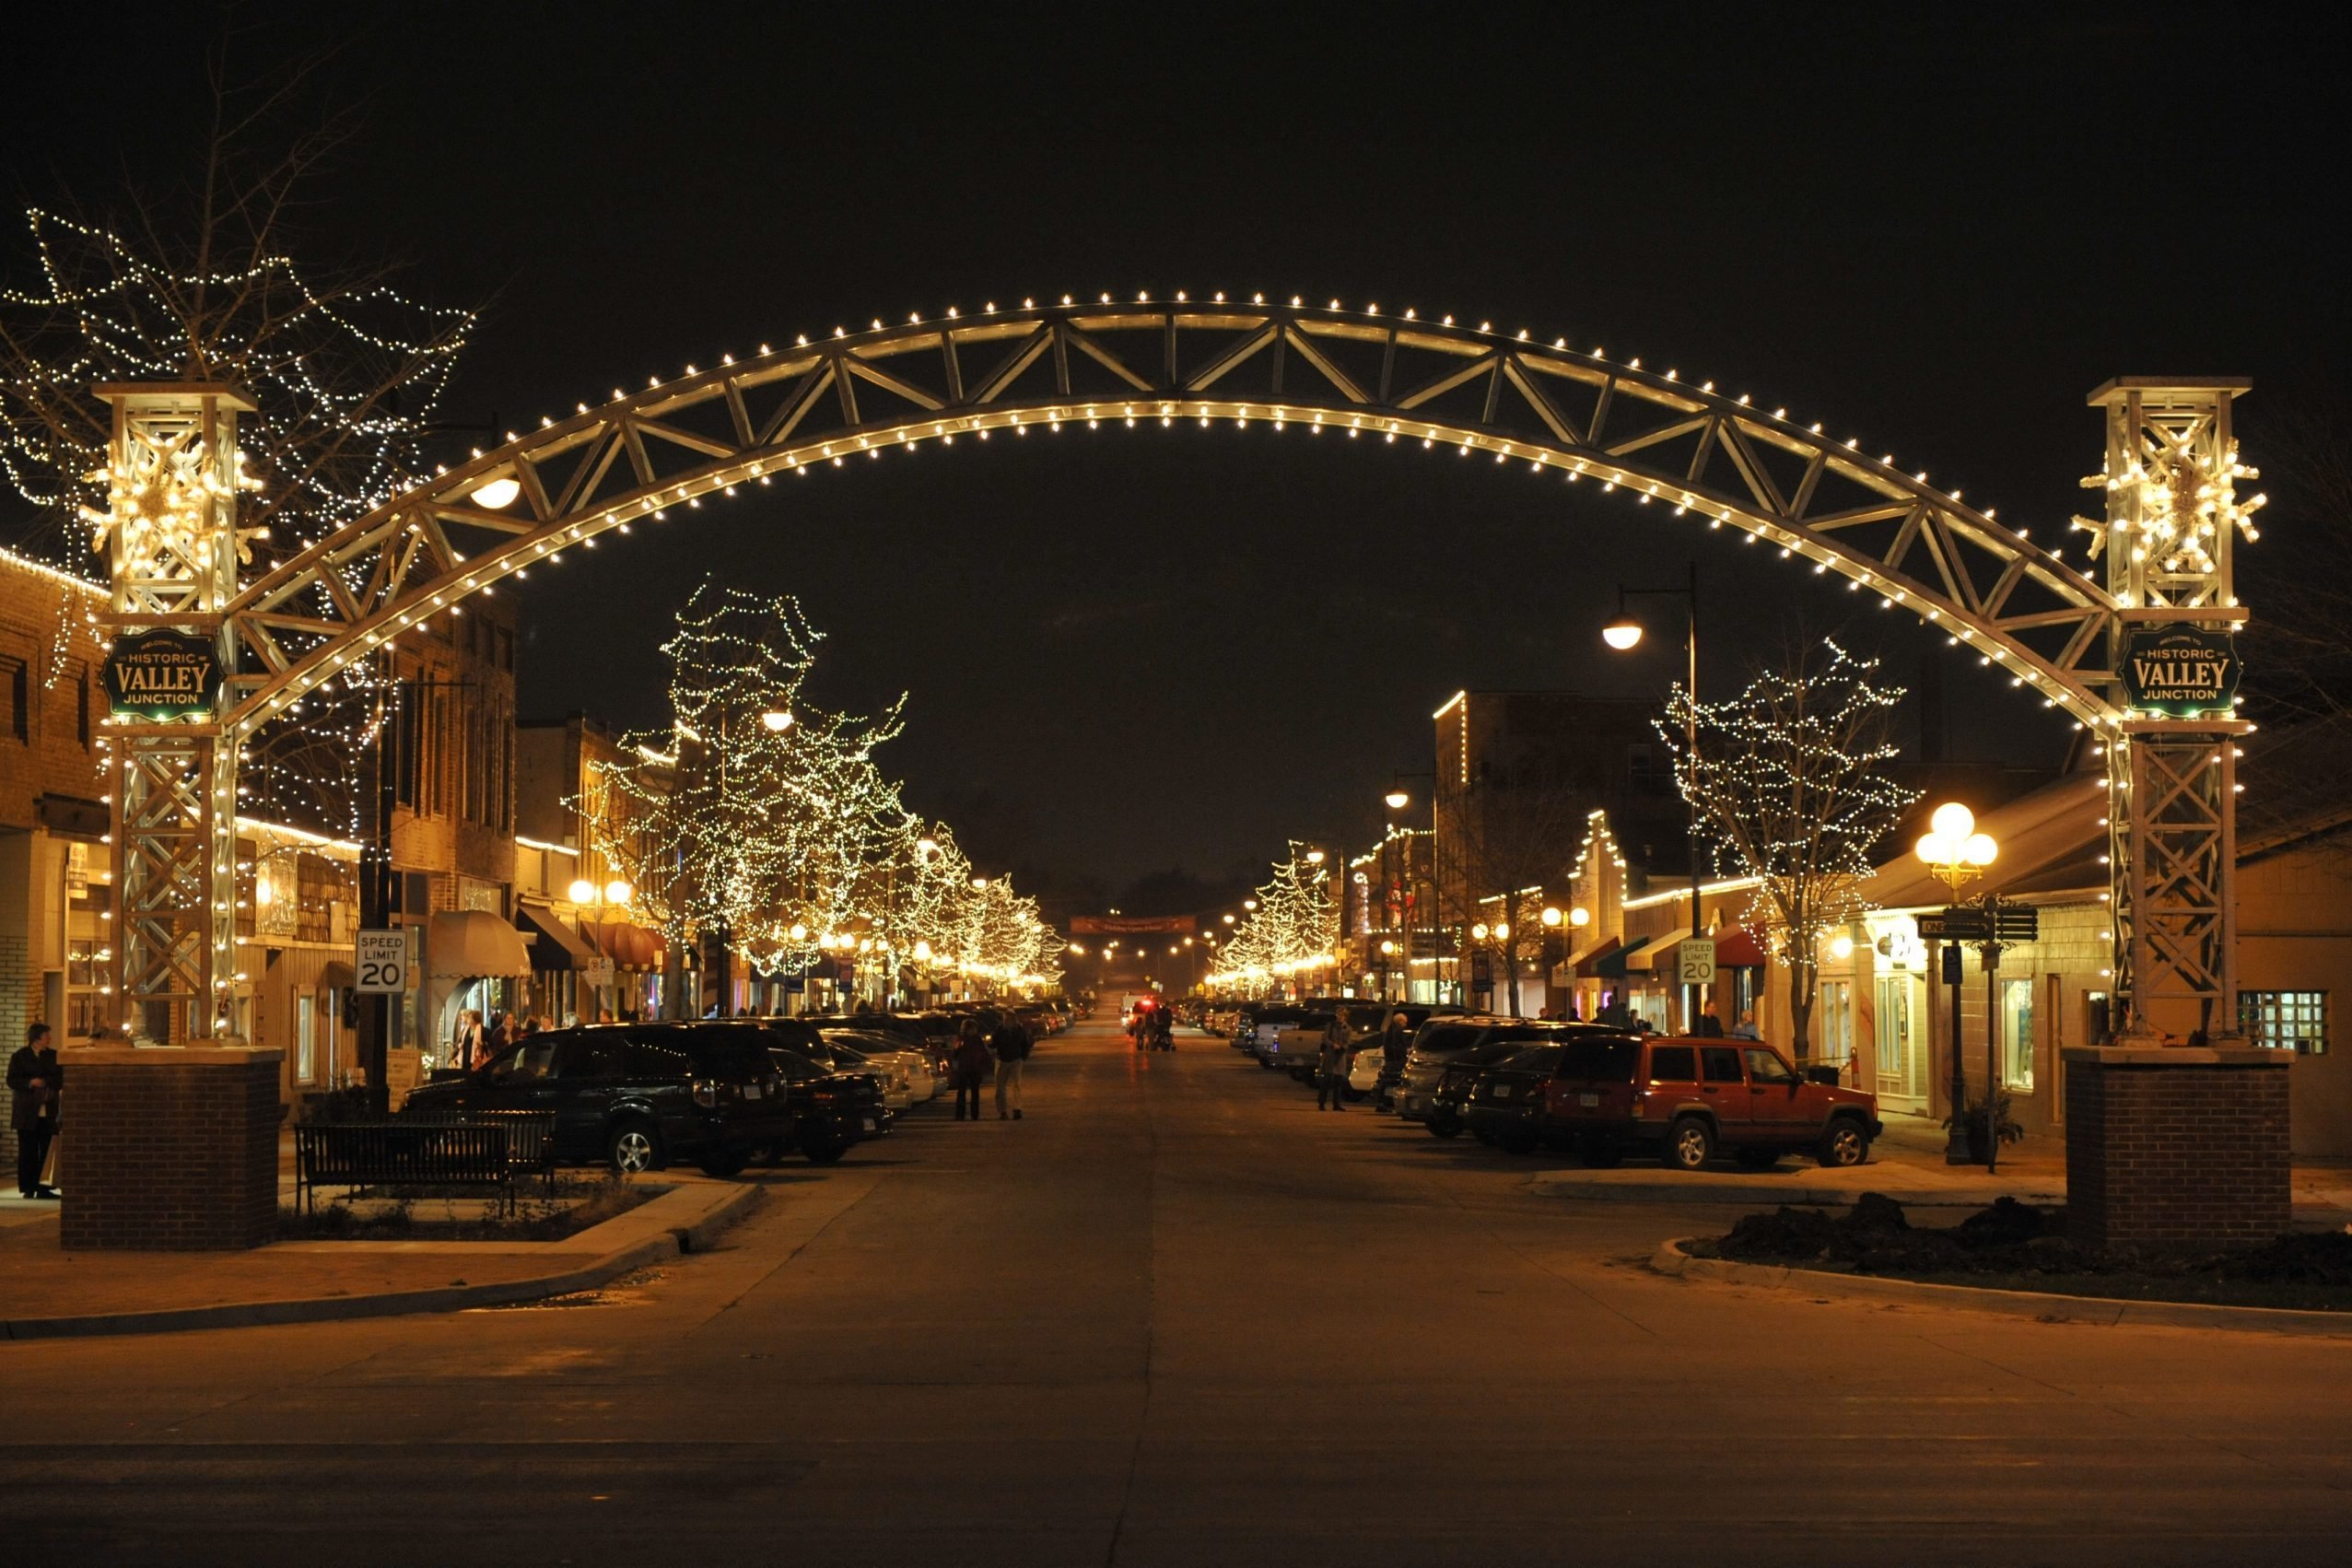 <p><strong>Best for:</strong> A Midwestern getaway</p> <p>Is this holiday heaven? No, it's Iowa! One of the best of the state's many small-town Christmas celebrations happens in the thriving, quaint village of Valley Junction. For four Thursday evenings during the season, the historic railroad town in the West Des Moines area celebrates with Jingle in the Junction. The streets are lined with over 125,000 twinkling lights, and visitors can enjoy horse-drawn carriage rides, Santa, and caroling. Shop for gifts in the 150 unique stores, antique shops, and other businesses downtown. It'll make you feel as if you're back in your own hometown.</p> <p>For a touch of upscale luxury to your down-home visit to Valley Junction, stay a few minutes up the road in the heart of Des Moines at the gorgeous, historic Des Lux Hotel. With its affordable rates, along with in-room fireplaces and whirlpool tubs, you'll want to spend the holidays in the Midwest more often.</p> <p class="listicle-page__cta-button-shop"><a class="shop-btn" href="https://www.tripadvisor.com/Hotel_Review-g37835-d262762-Reviews-Des_Lux_Hotel-Des_Moines_Iowa.html">Book Now</a></p>